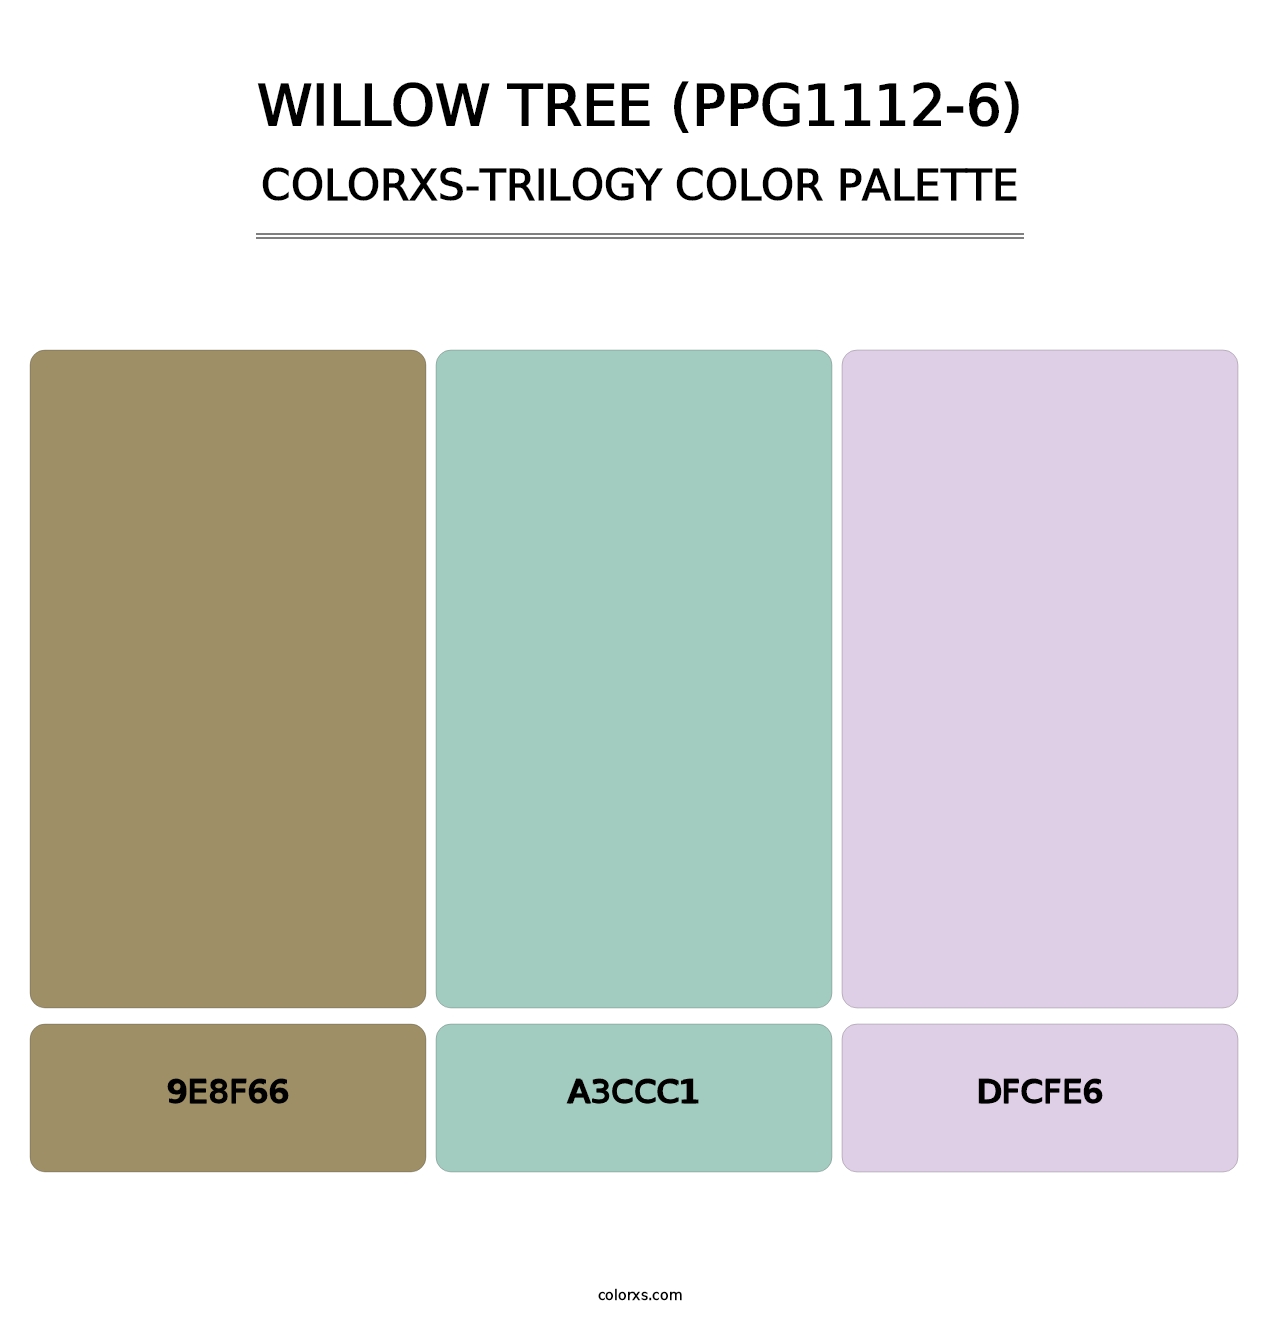 Willow Tree (PPG1112-6) - Colorxs Trilogy Palette